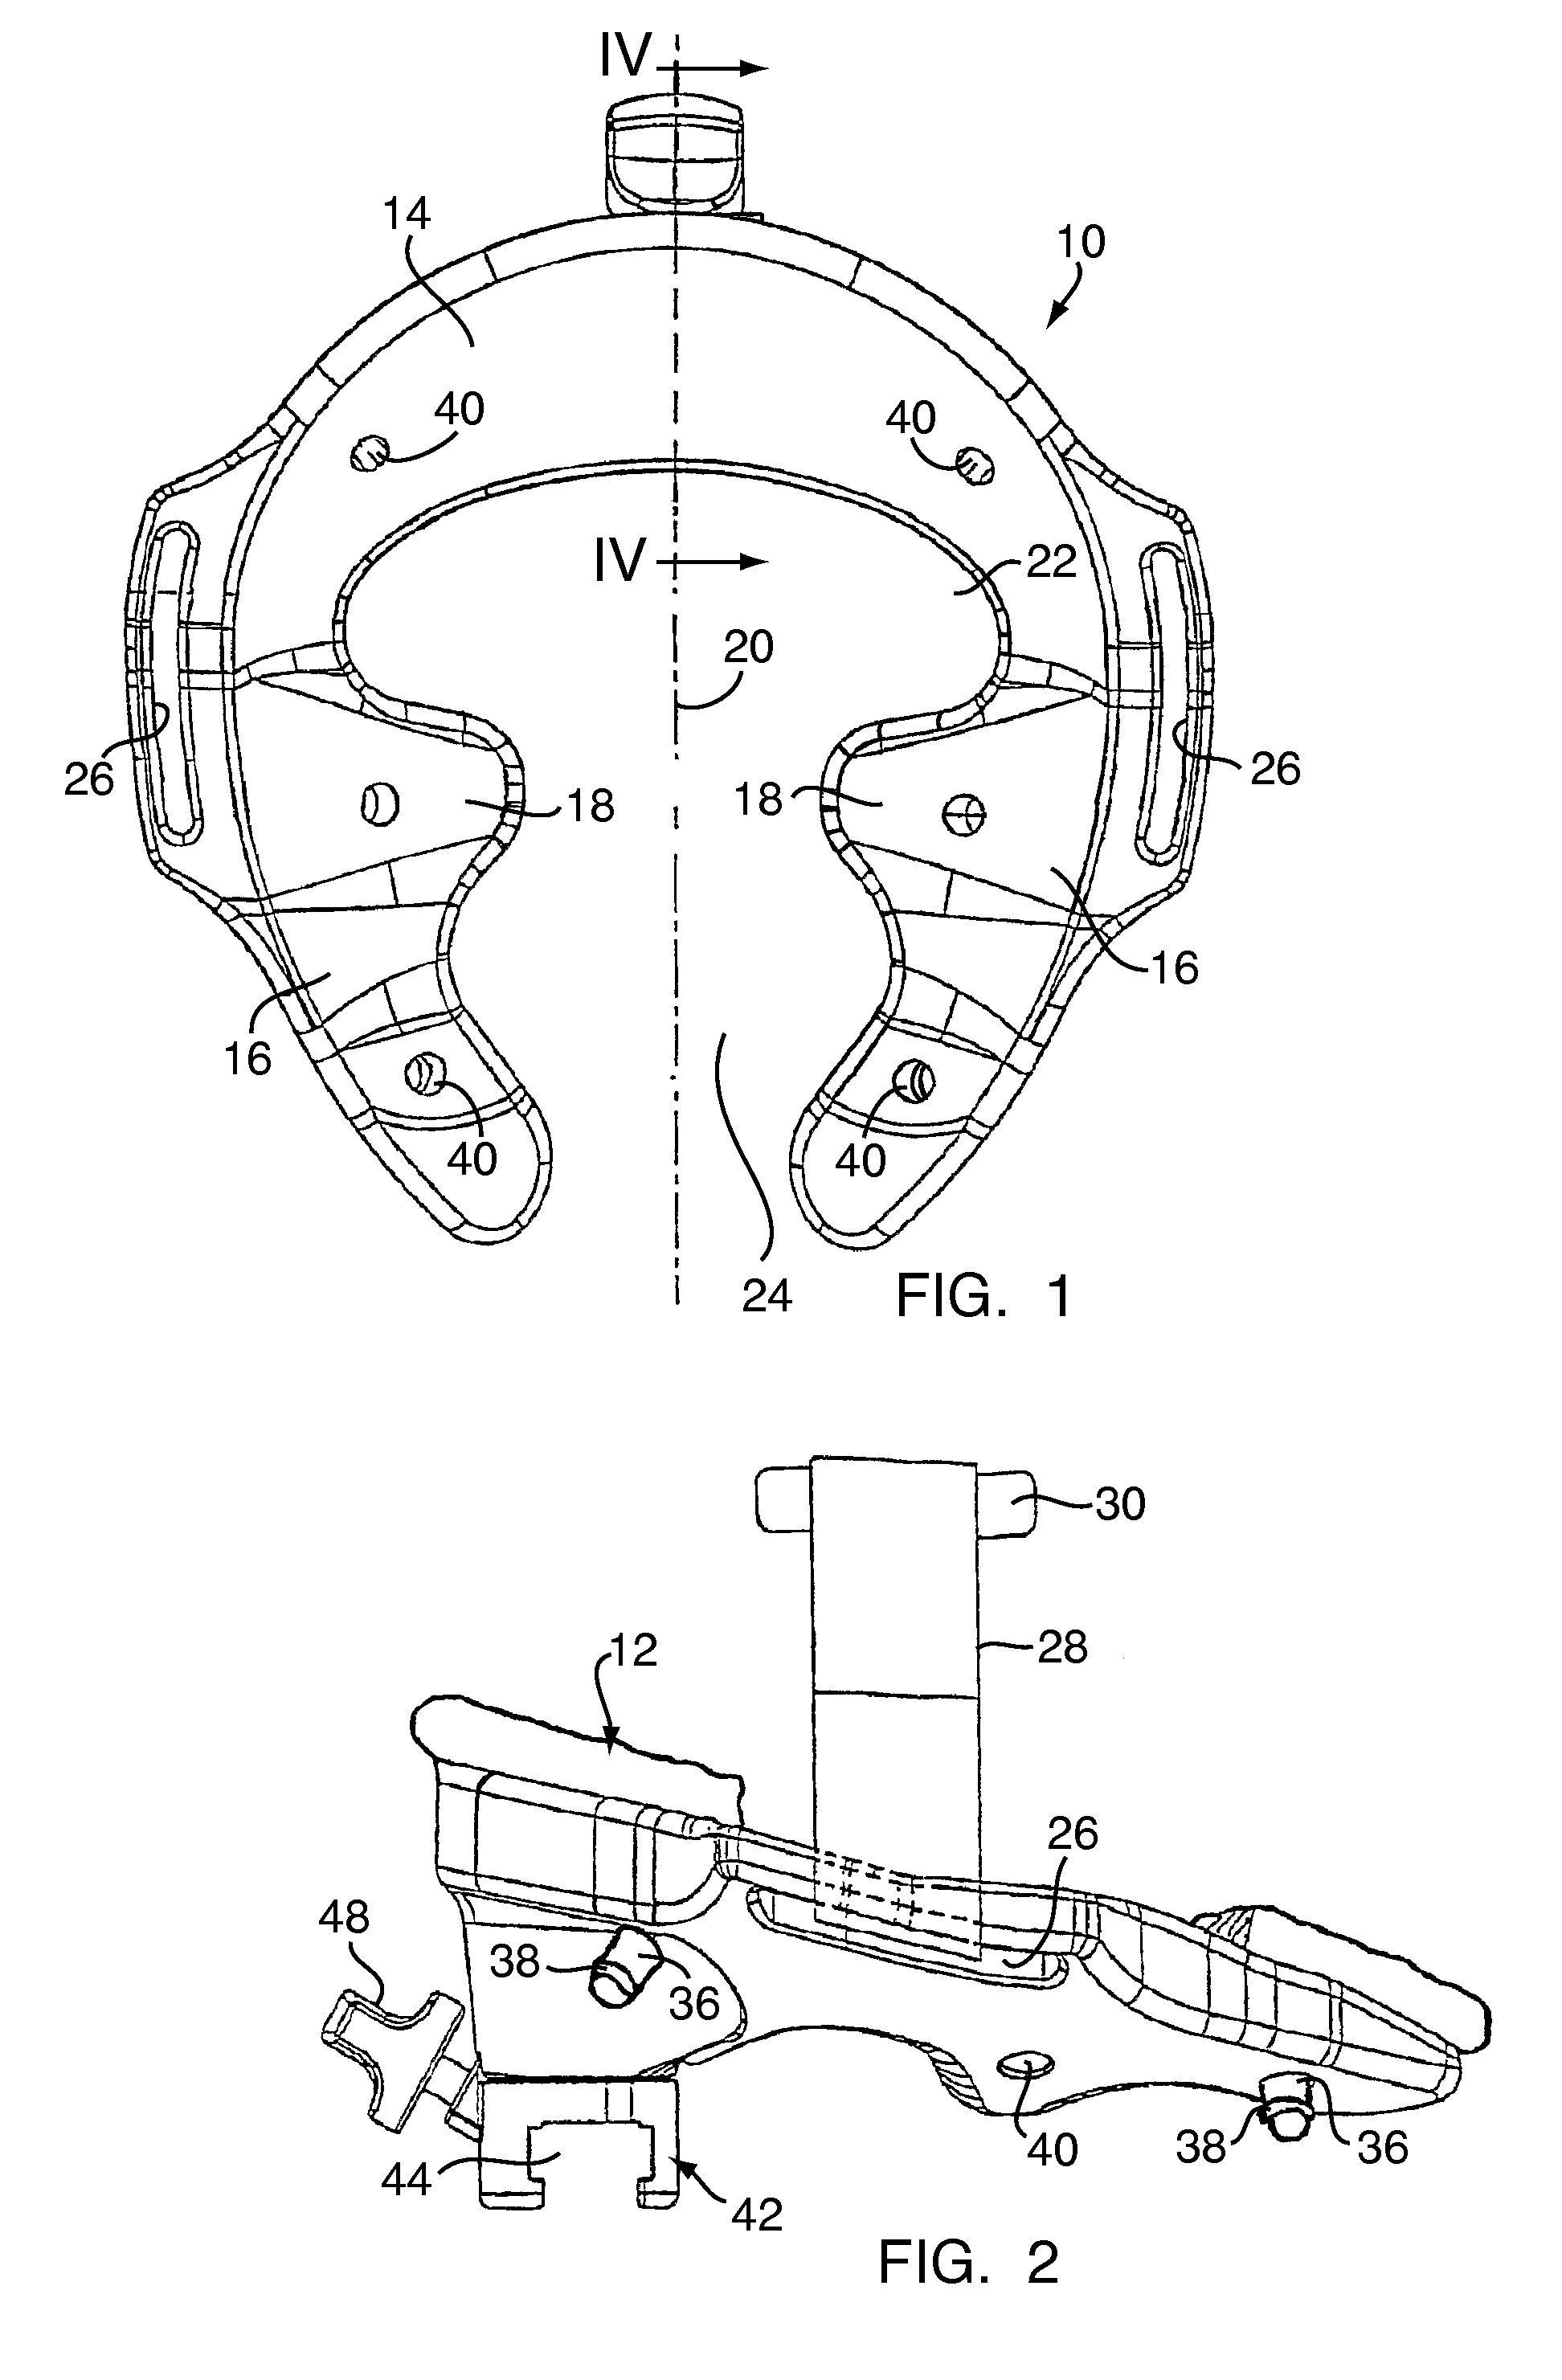 Headrest for a patient-bearing surface